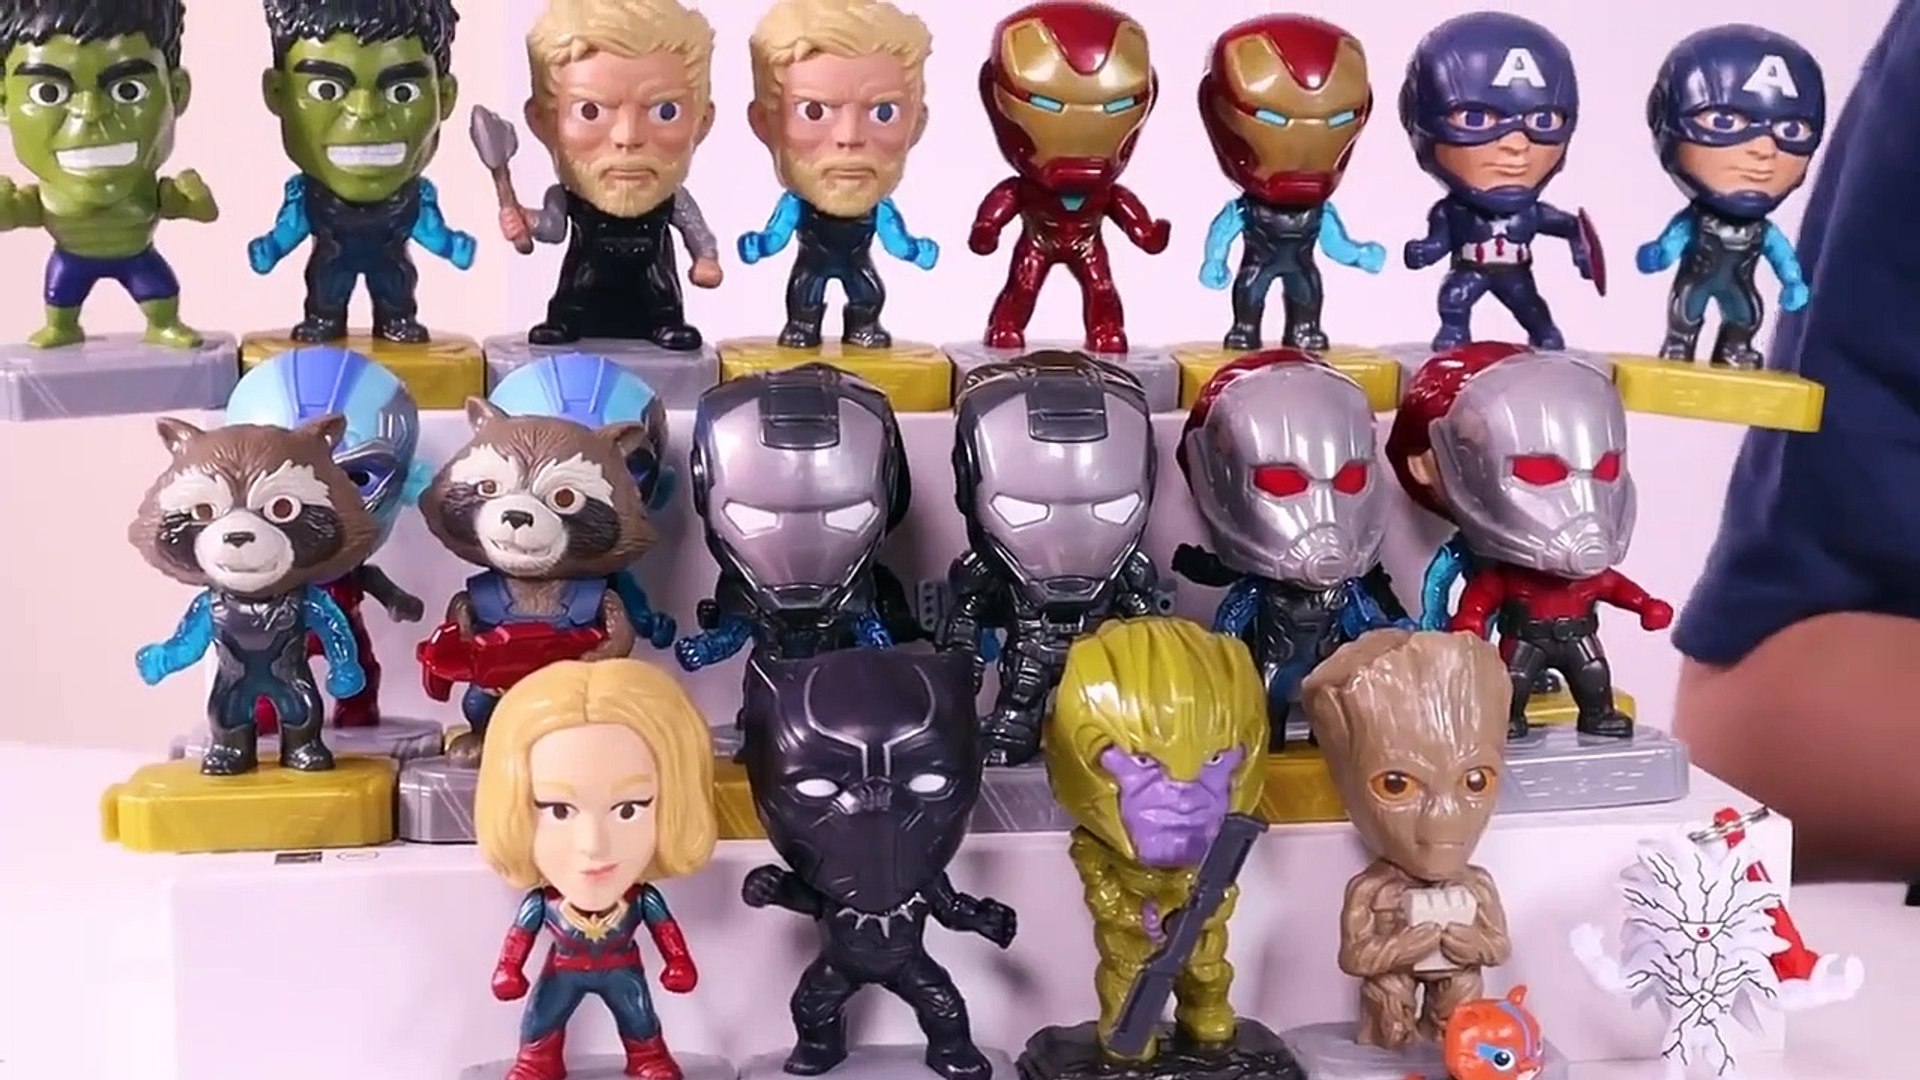 Giant Surprise Eggs With Avengers Endgame Super Heroes And LOL Surprise Egg  Toys For Kids - video Dailymotion